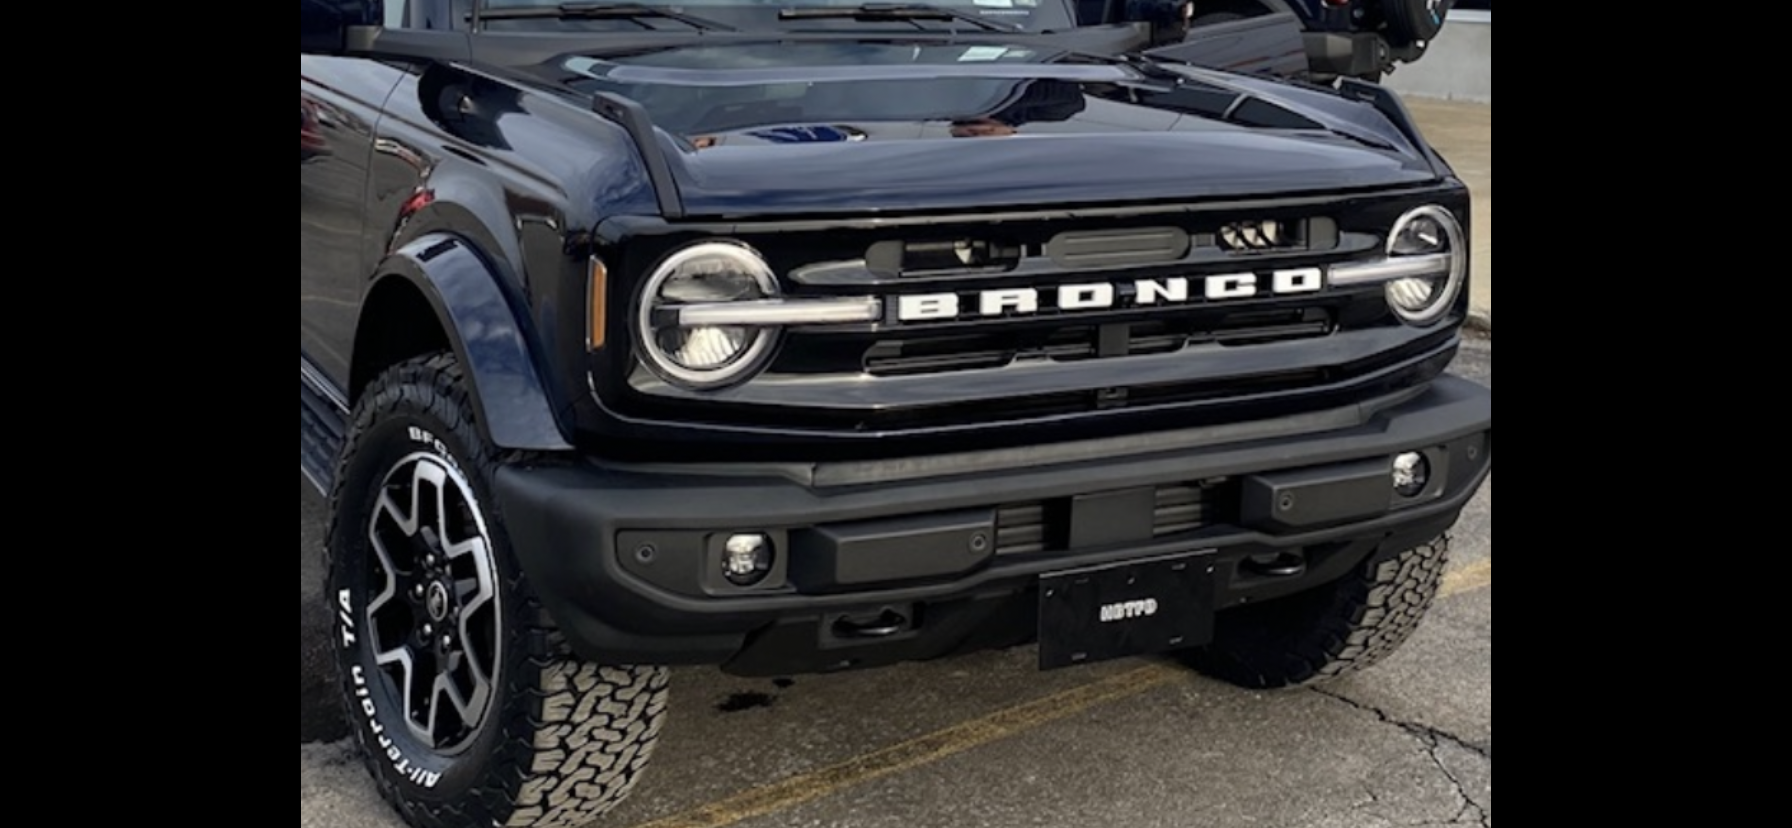 Ford Bronco PRICE DROP -FRONT LICENSE PLATE BRACKETS For Your Bronco 8E3D7D06-1743-49AD-B6B4-C5699BD8229E